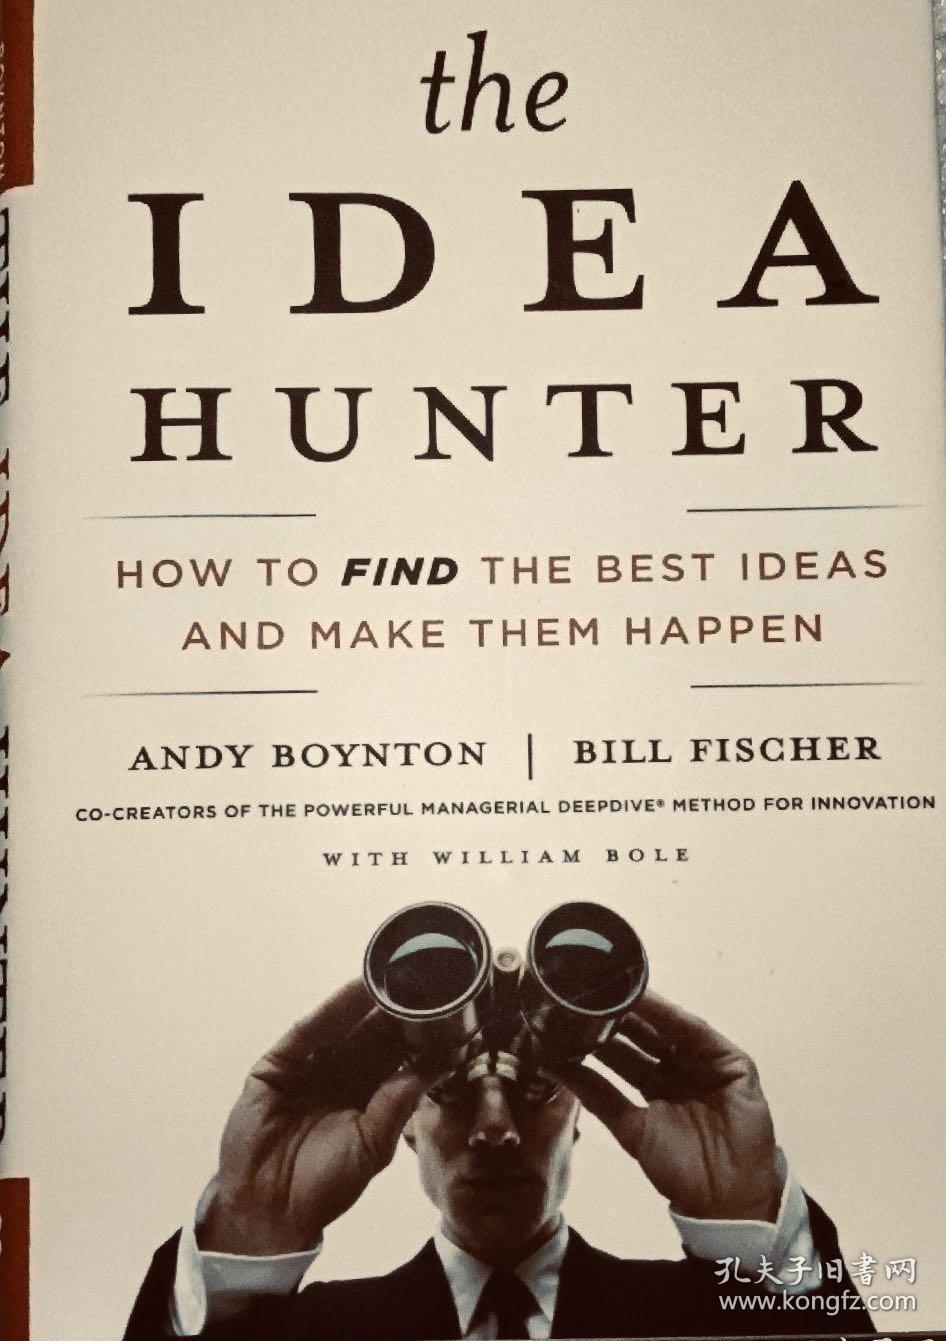 The Idea Hunter：How to Find the Best Ideas and Make Them Happen创意猎人:如何找到最好的创意并实现它们英文原版精装